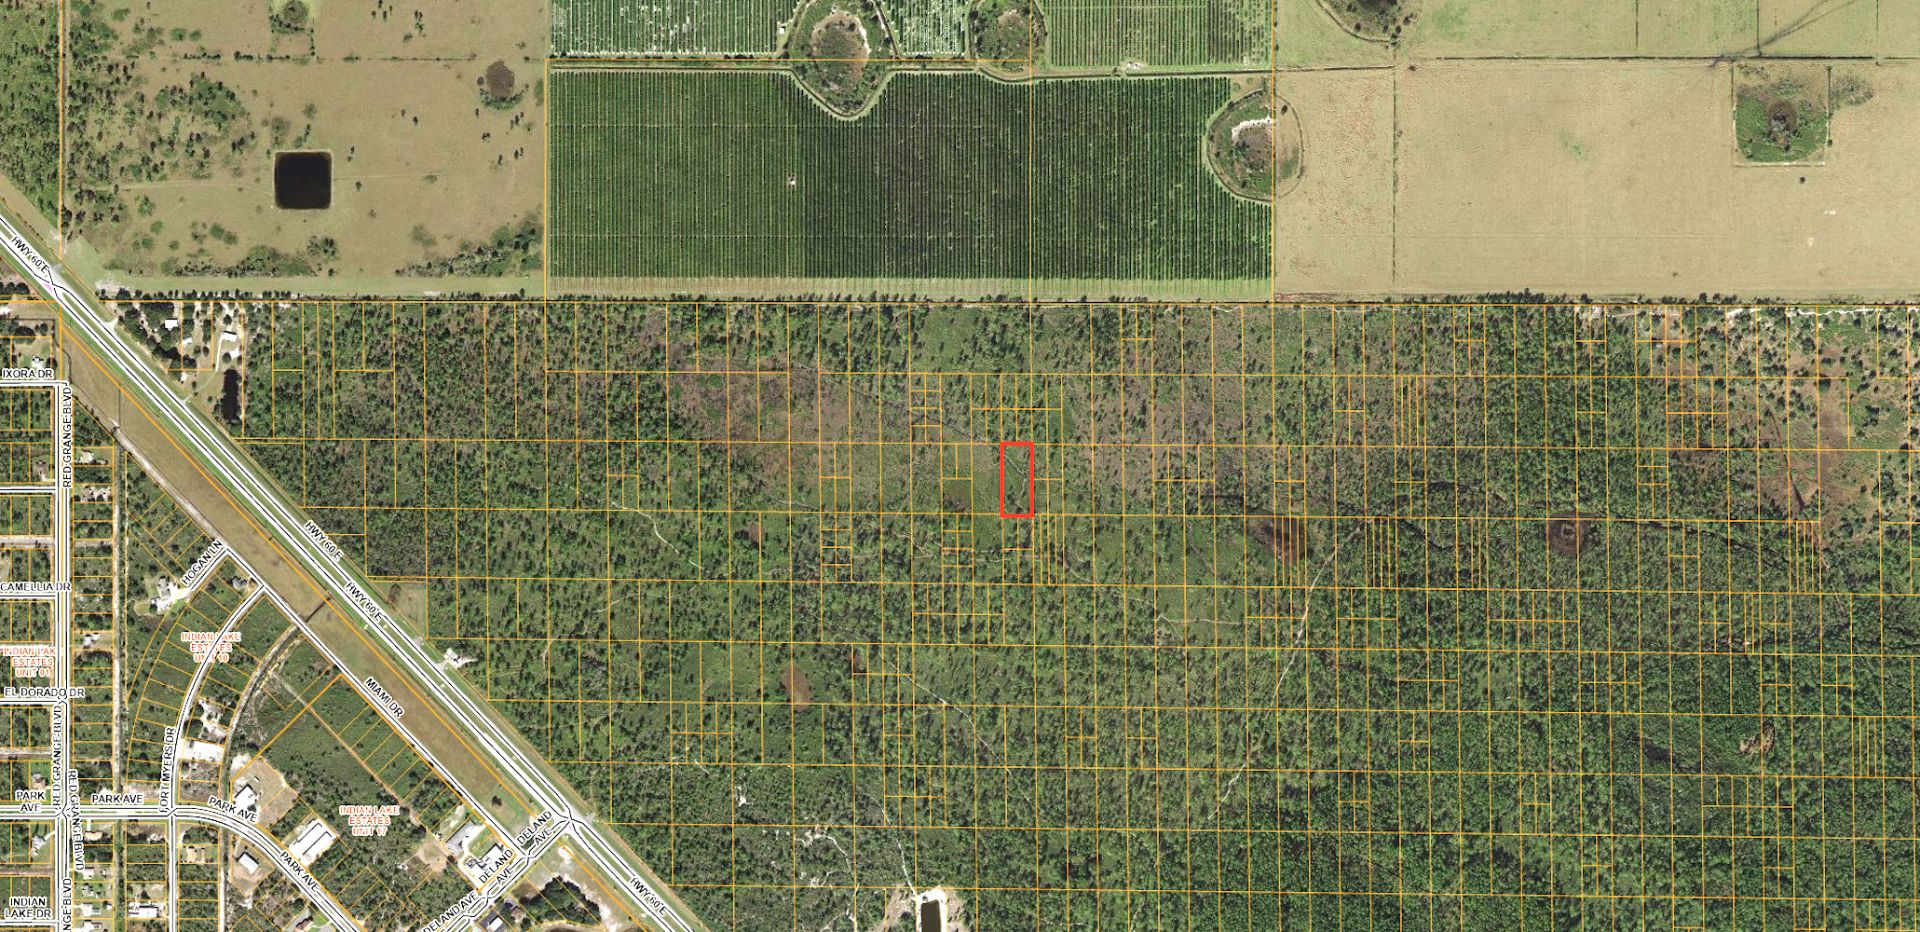 Almost 1.5 Acres + Surrounded by the Kissimmee Chain of Lakes in Sunny FL! - Image 4 of 12